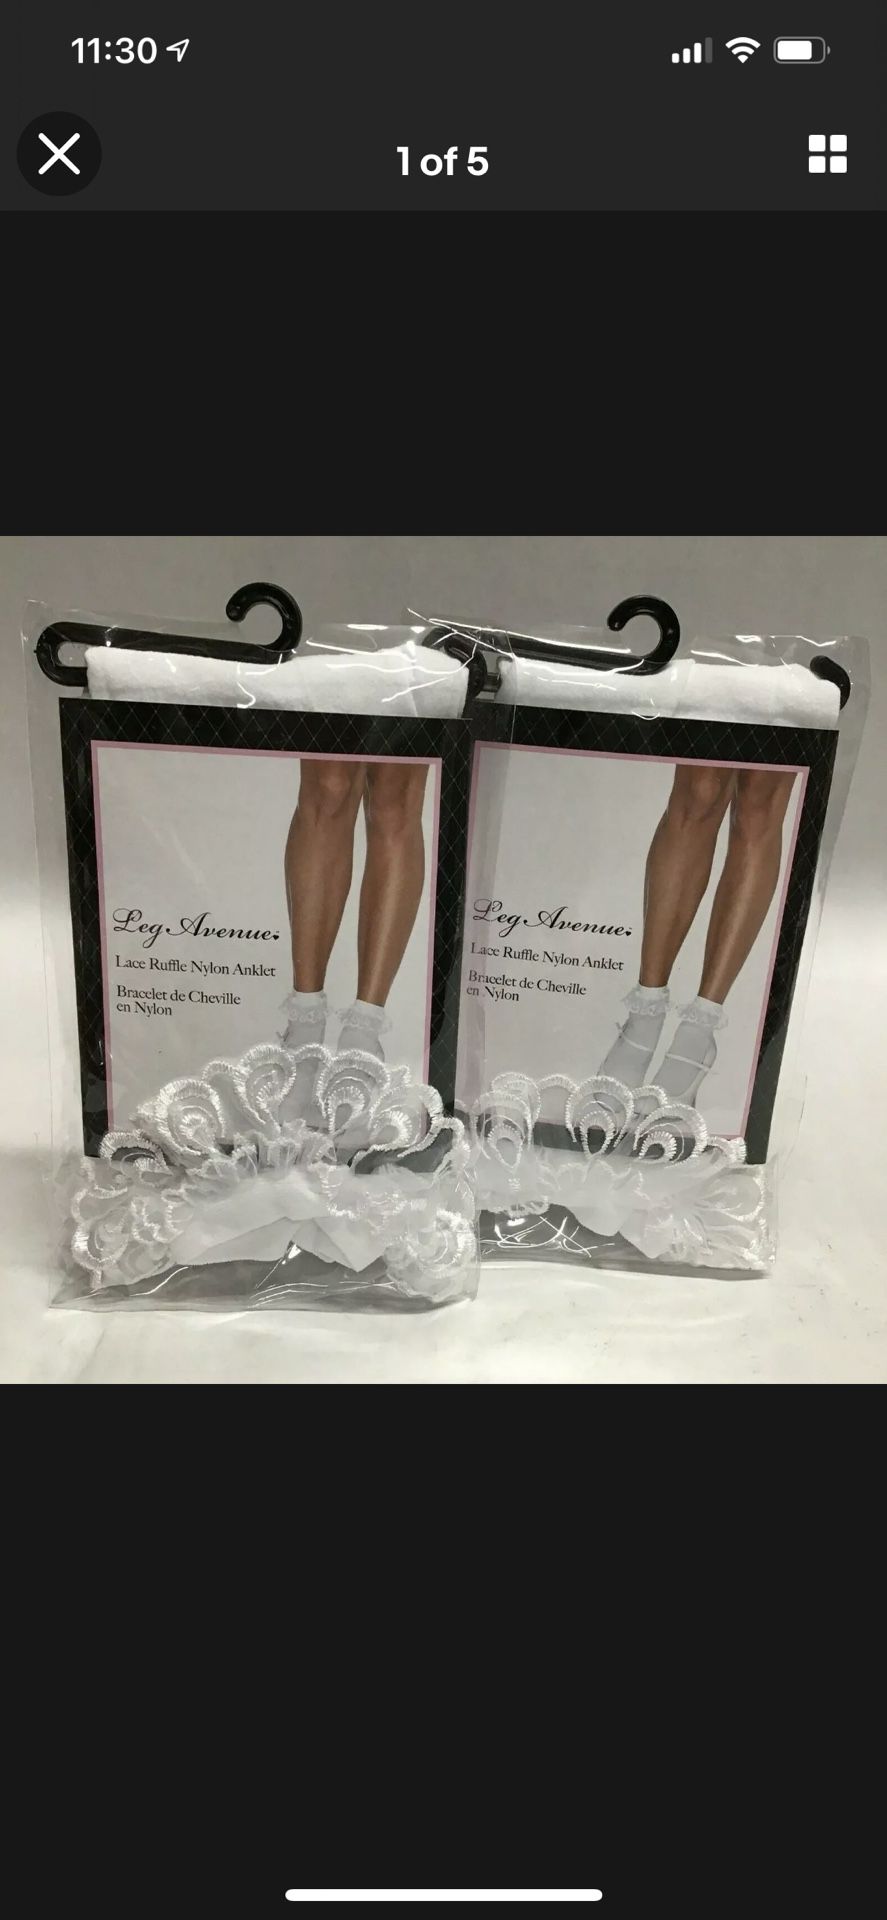 Leg Avenue Lace Trimmed Socks (2 Pairs) New